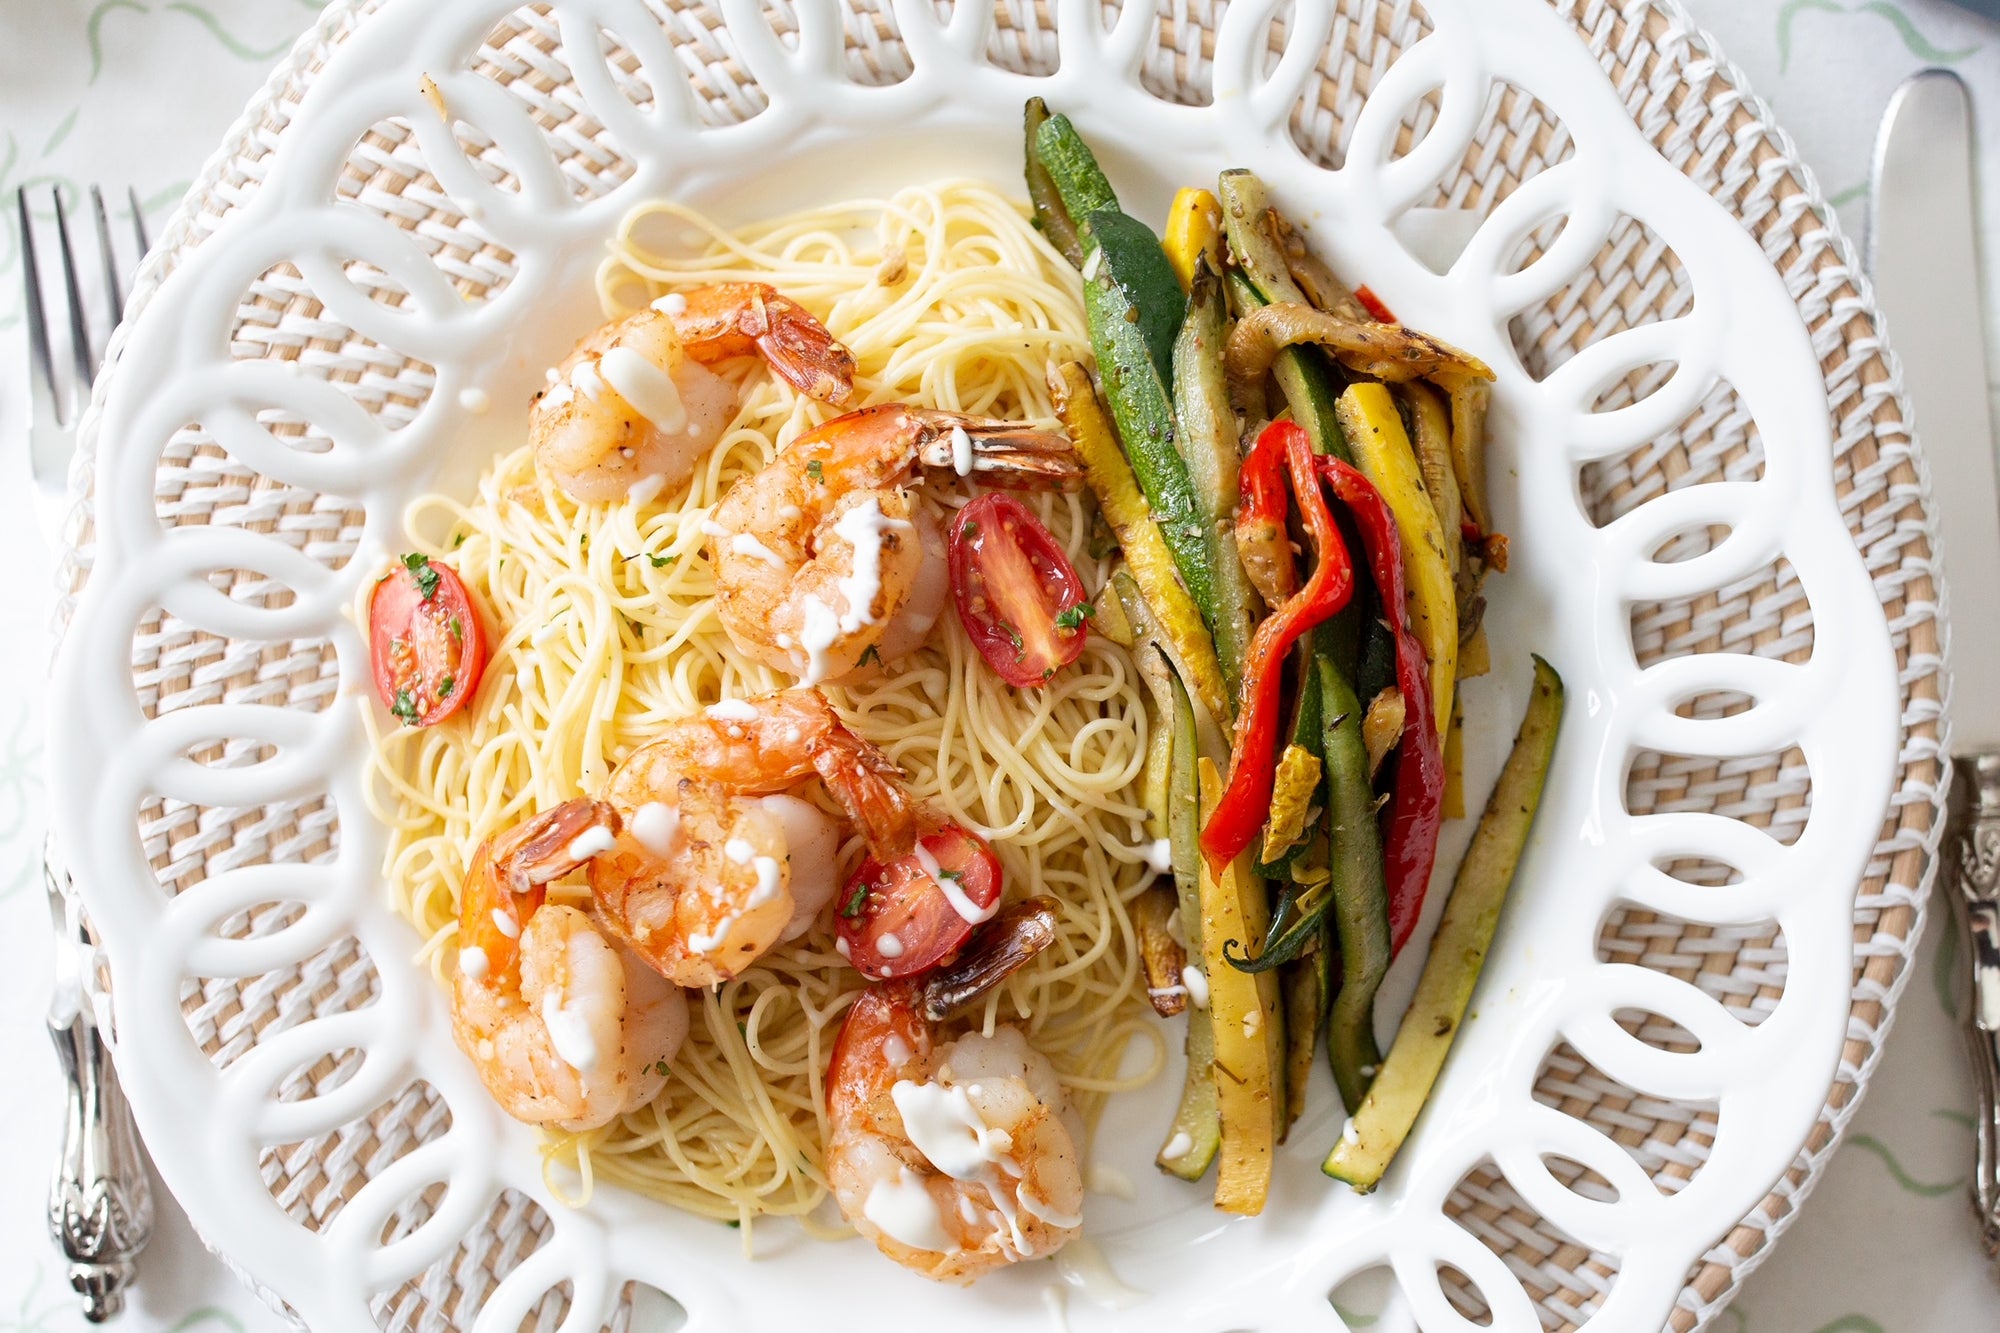 Instead of Flowers - Build a Meal - Jumbo Shrimp Scampi – Deluxe Entree